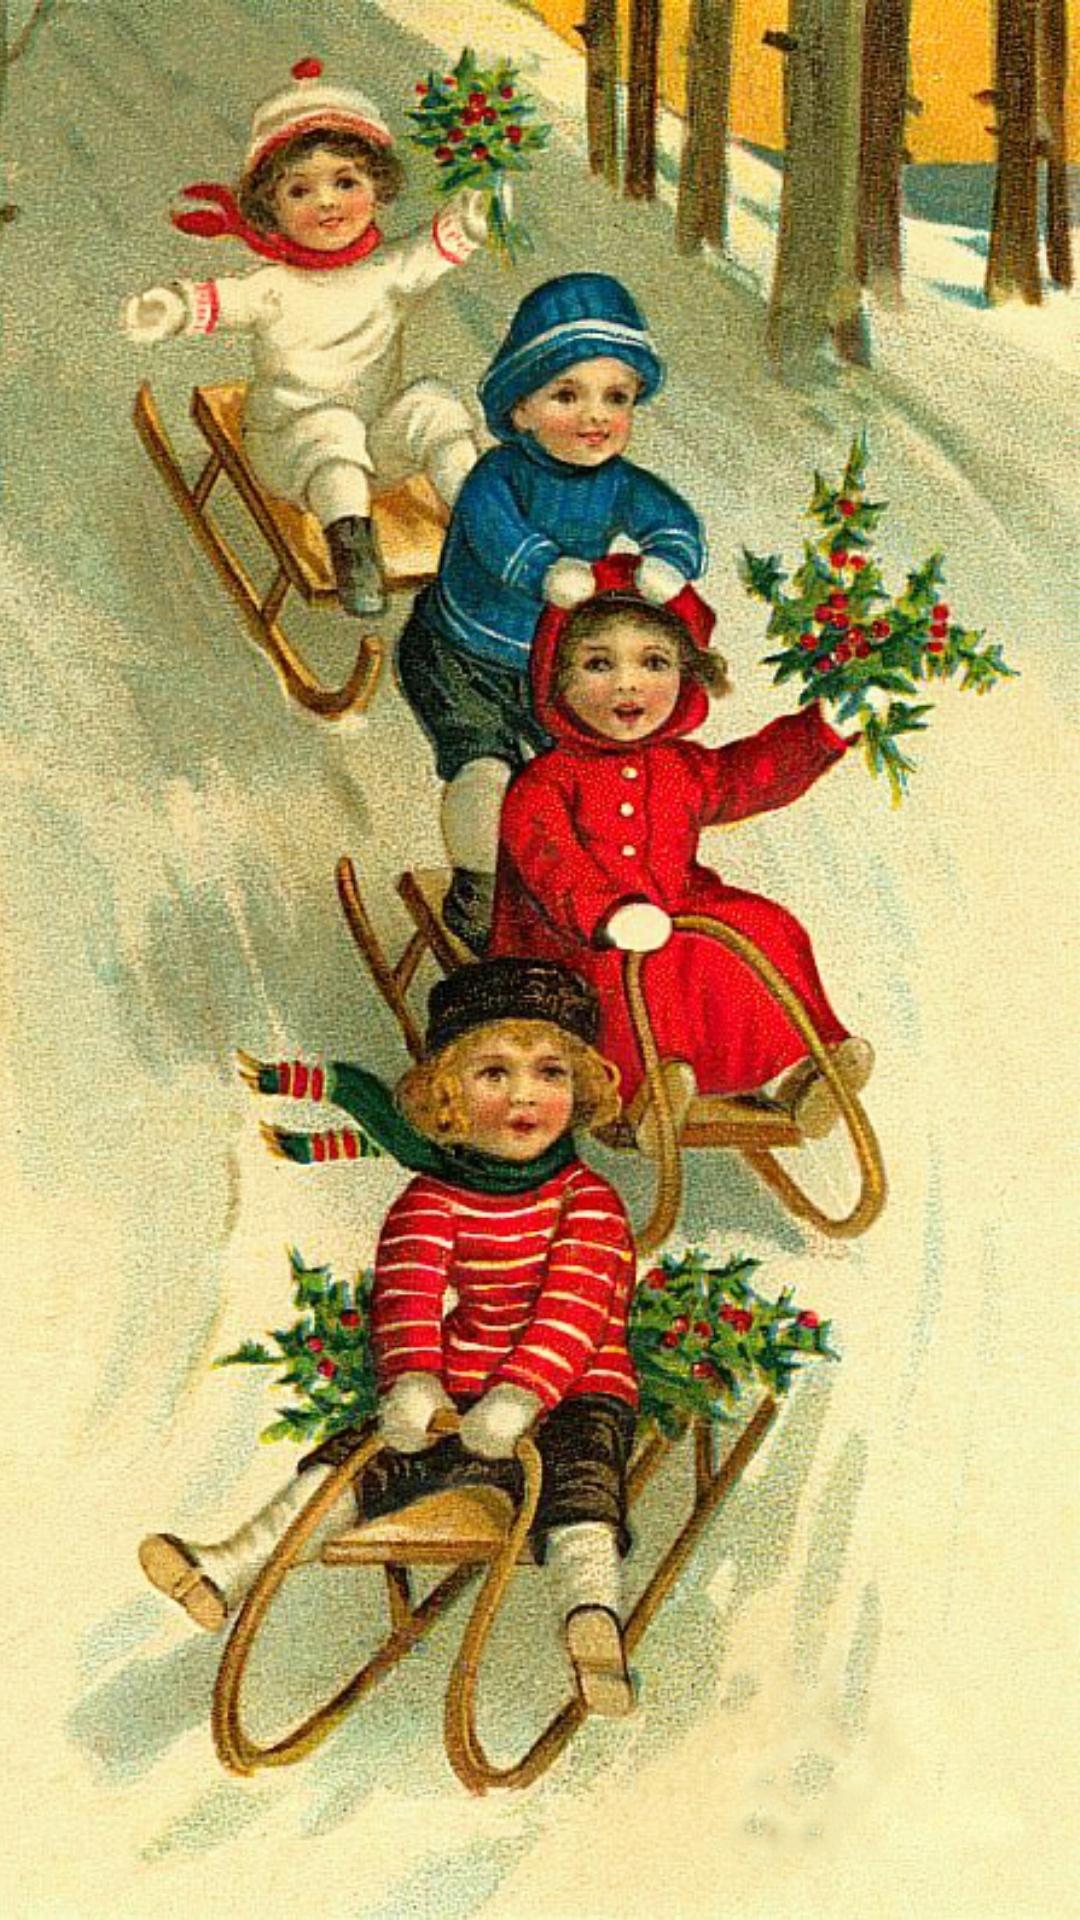 Vintage postcard image of children sledding used as an Christmas phone background.